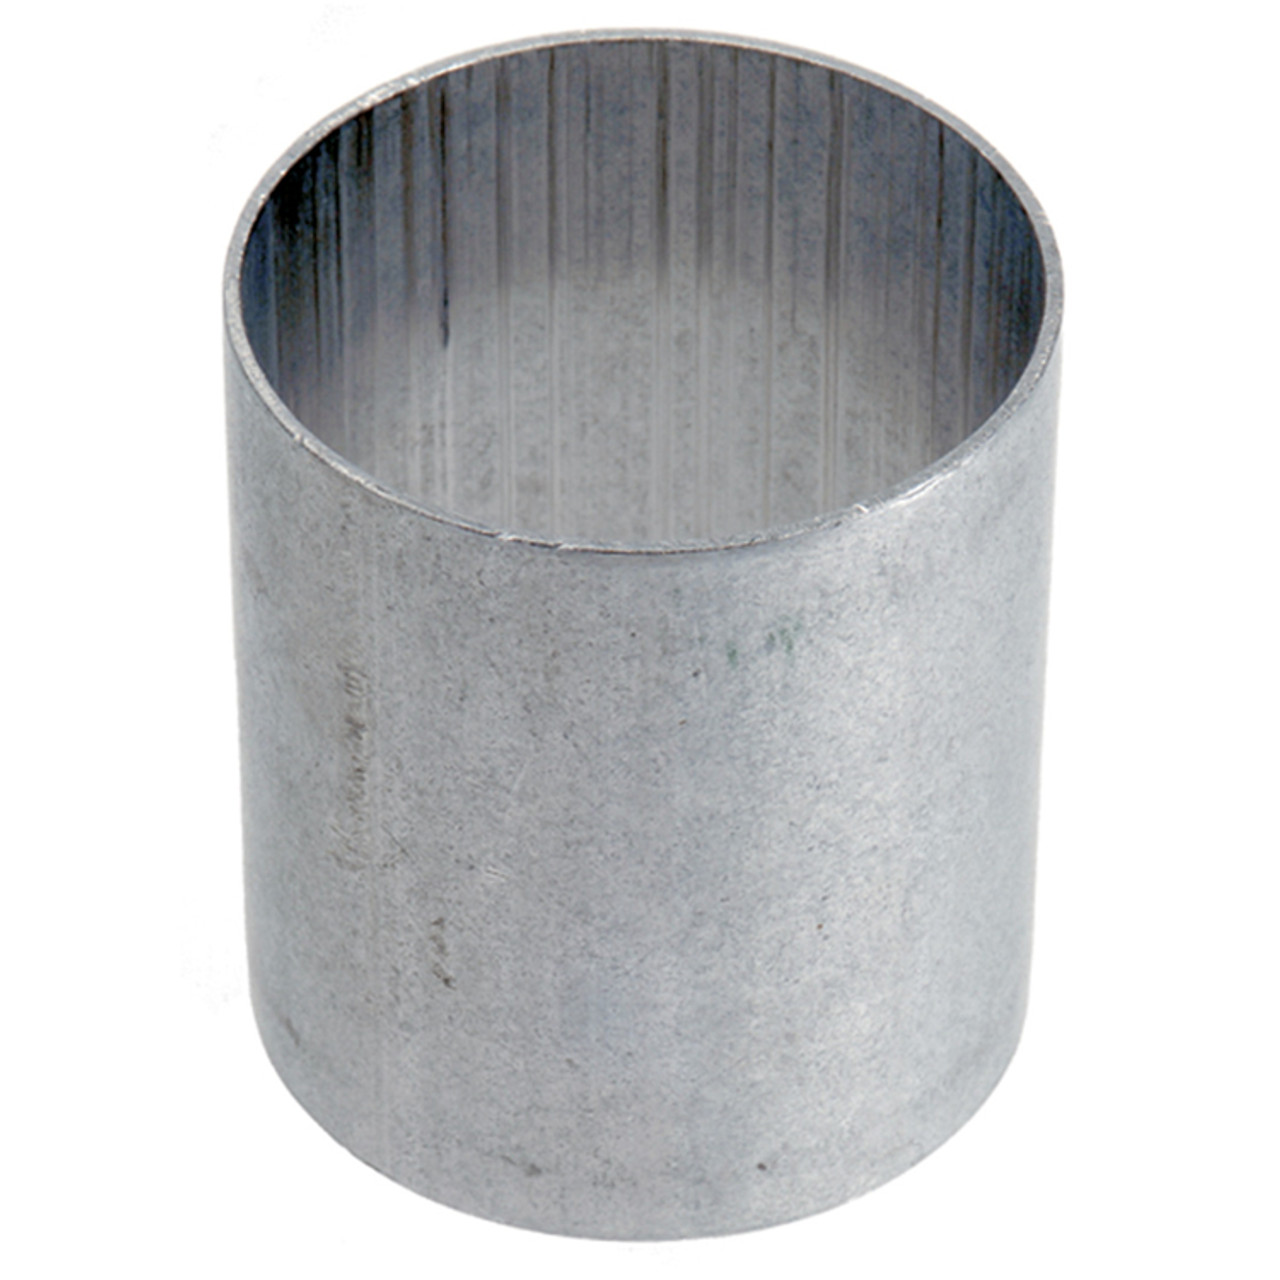 2.75" Stainless Steel Hose Sleeve   G3SS-275